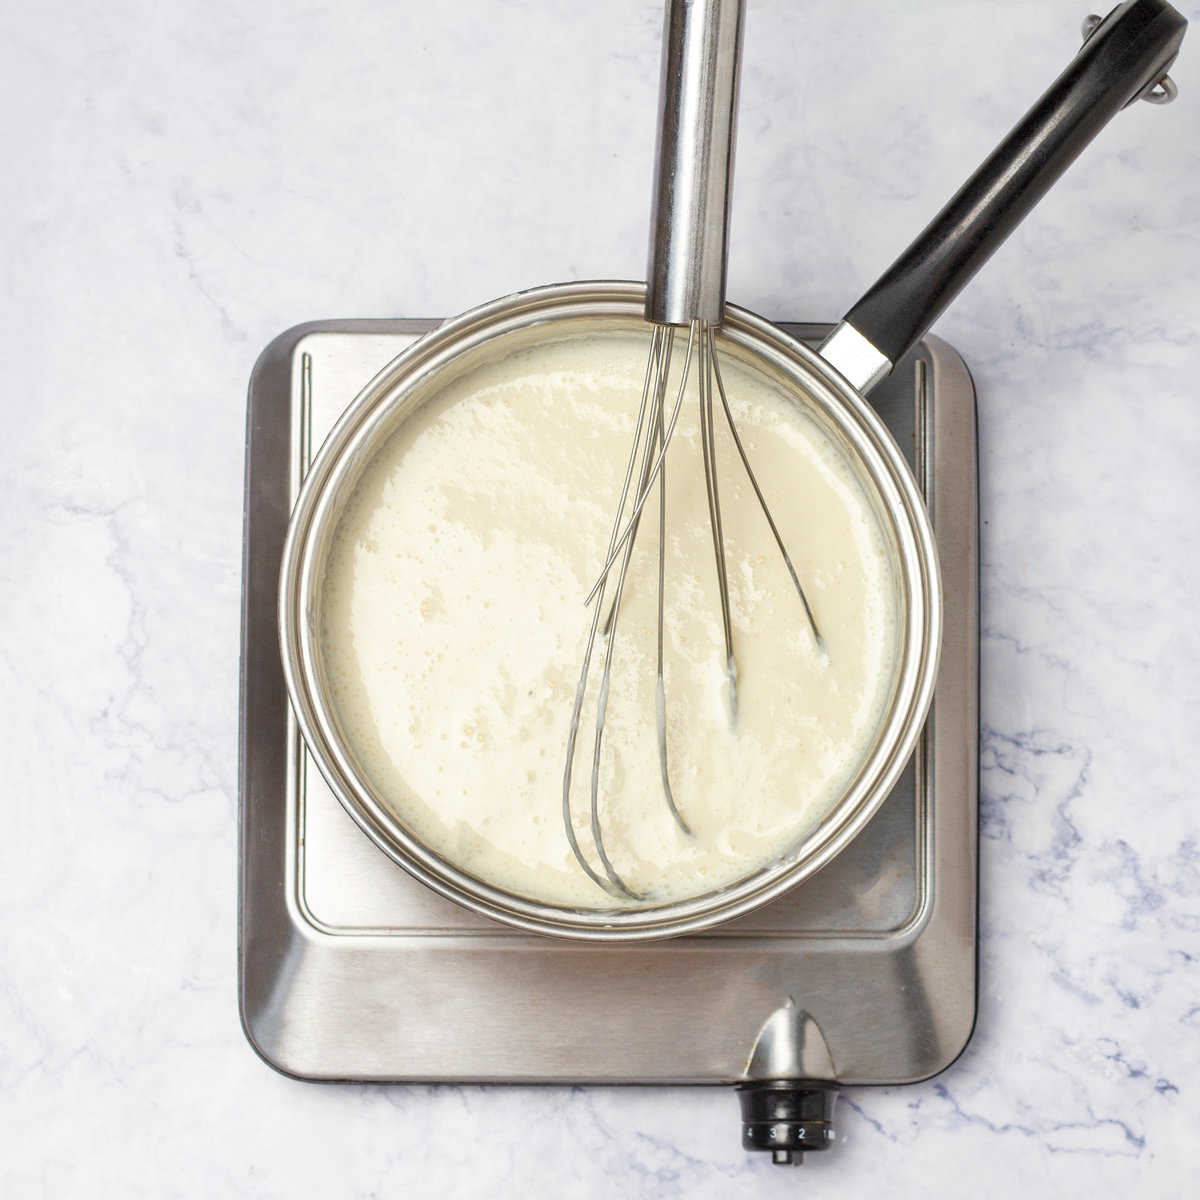 Bechamel Sauce in a saucepan with a whisker